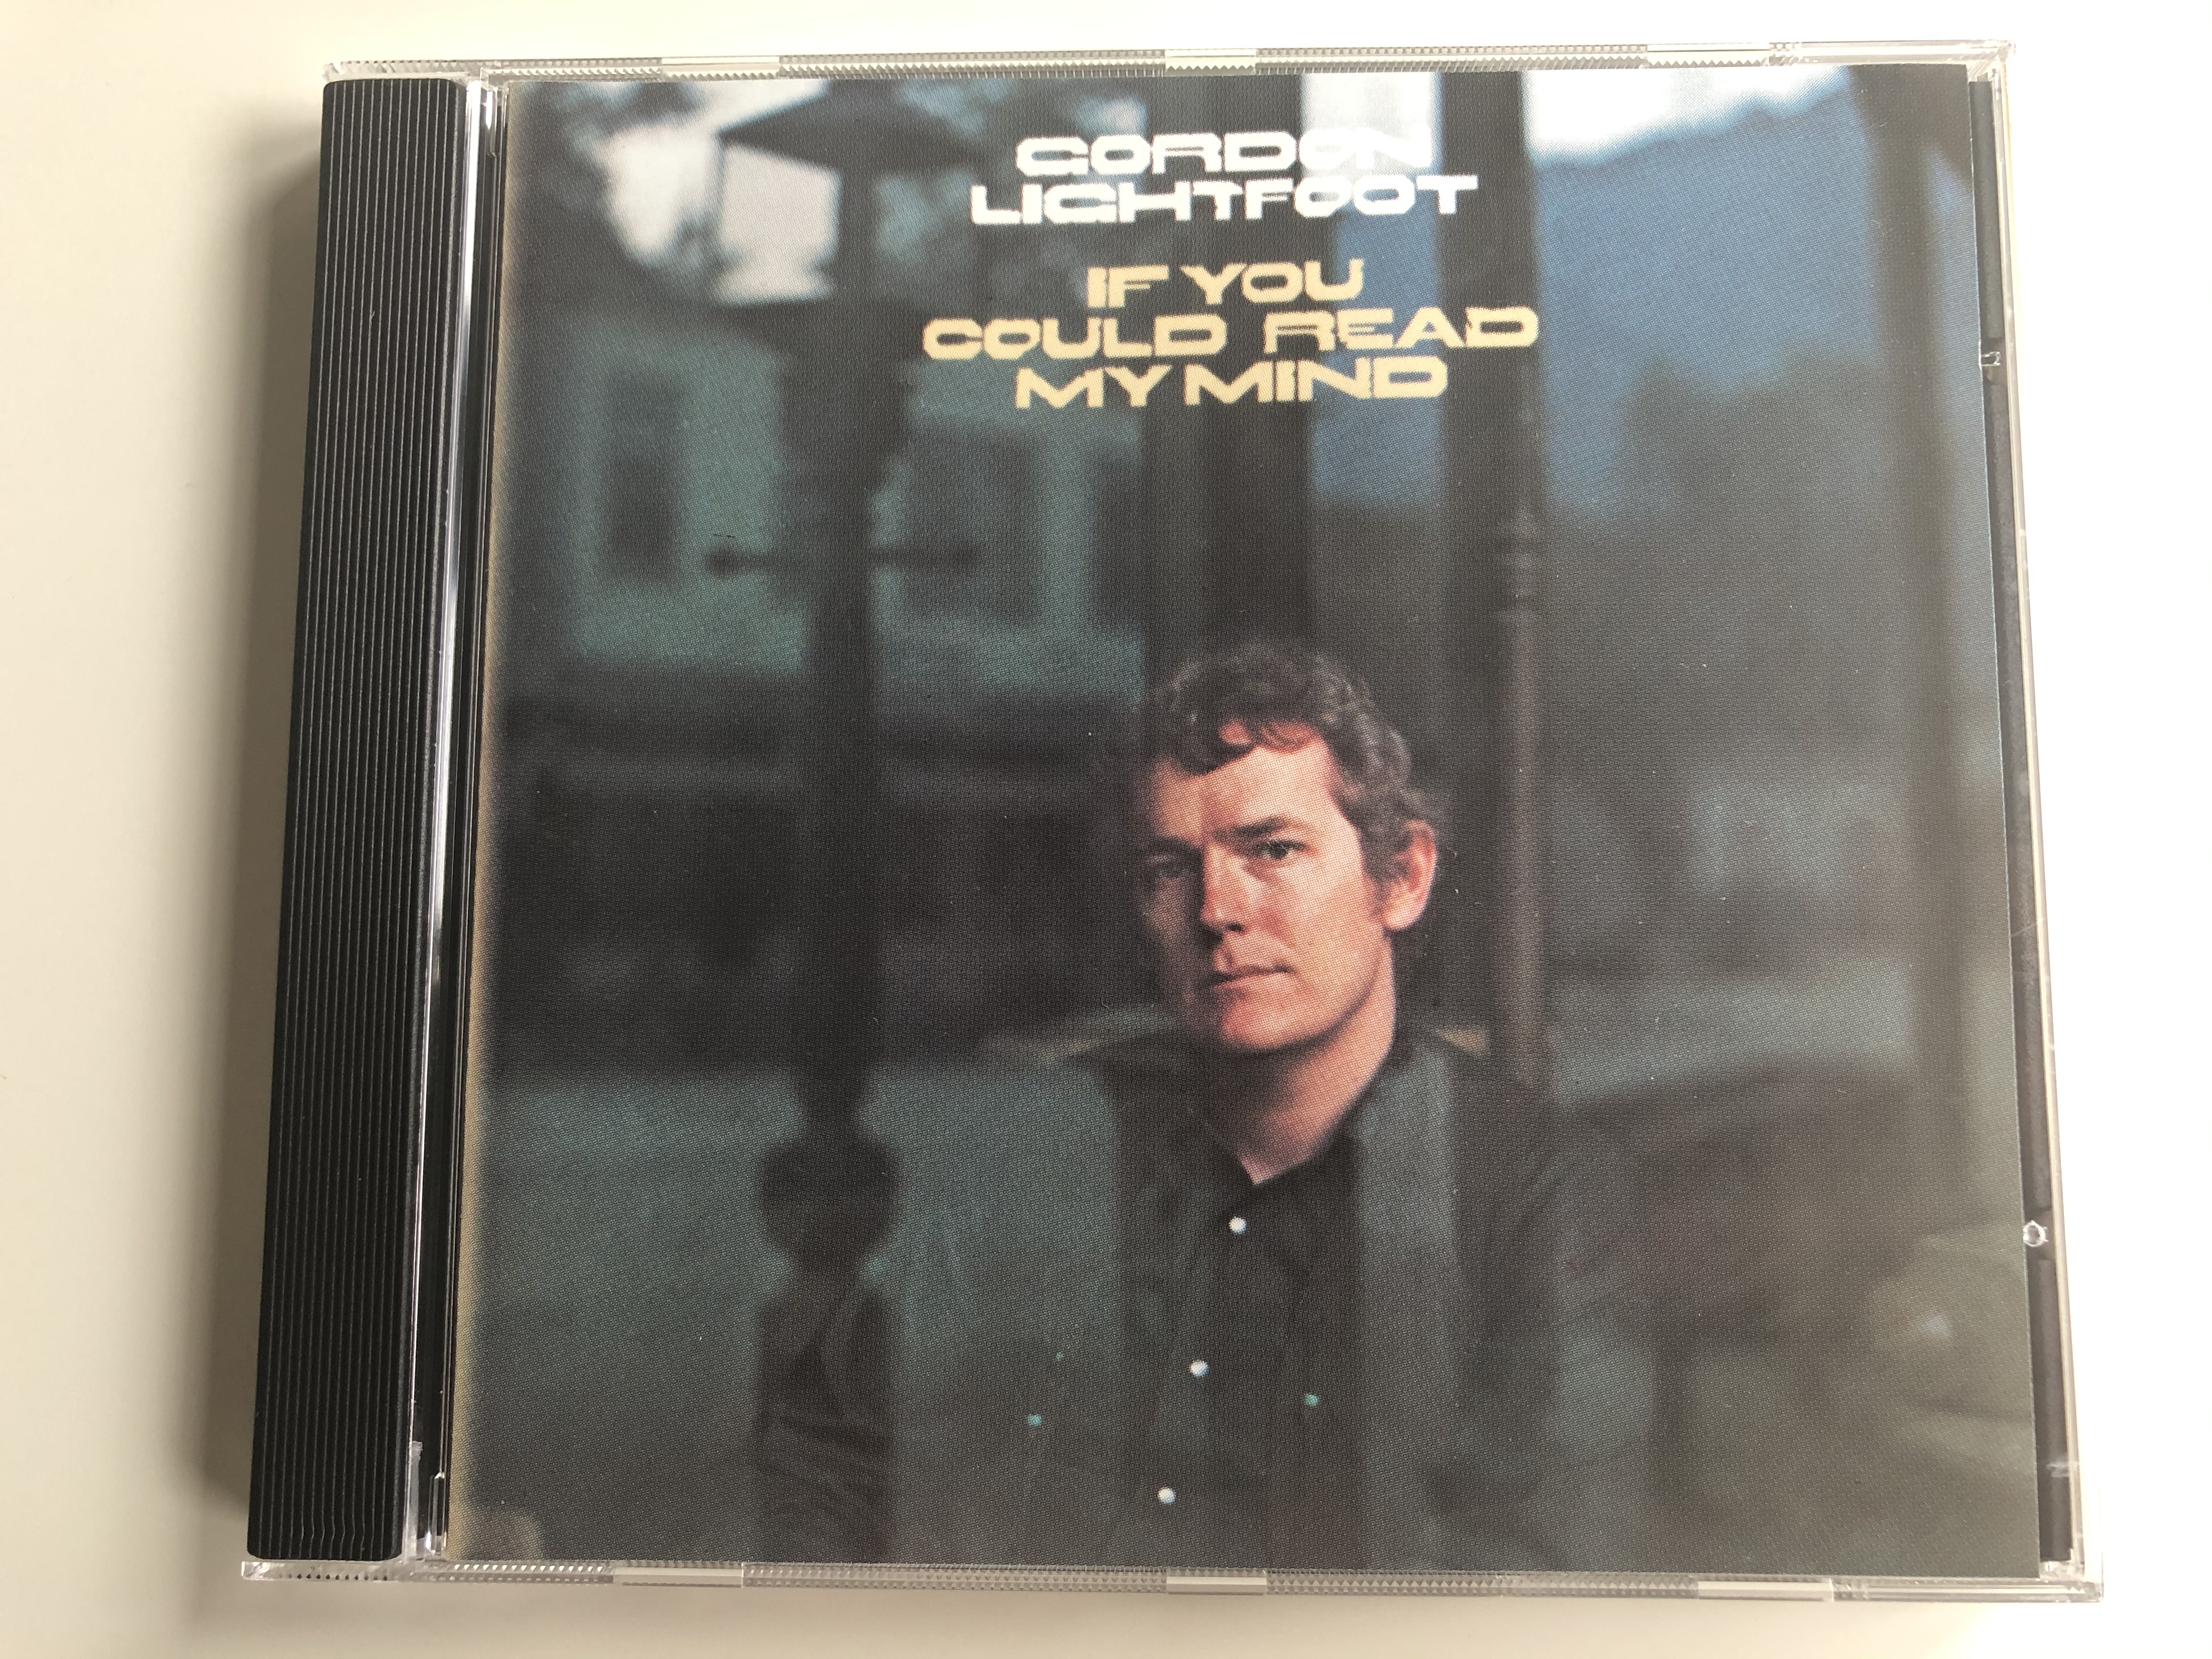 gordon-lightfoot-if-you-could-read-my-mind-reprise-records-audio-cd-7599-27451-2-1-.jpg